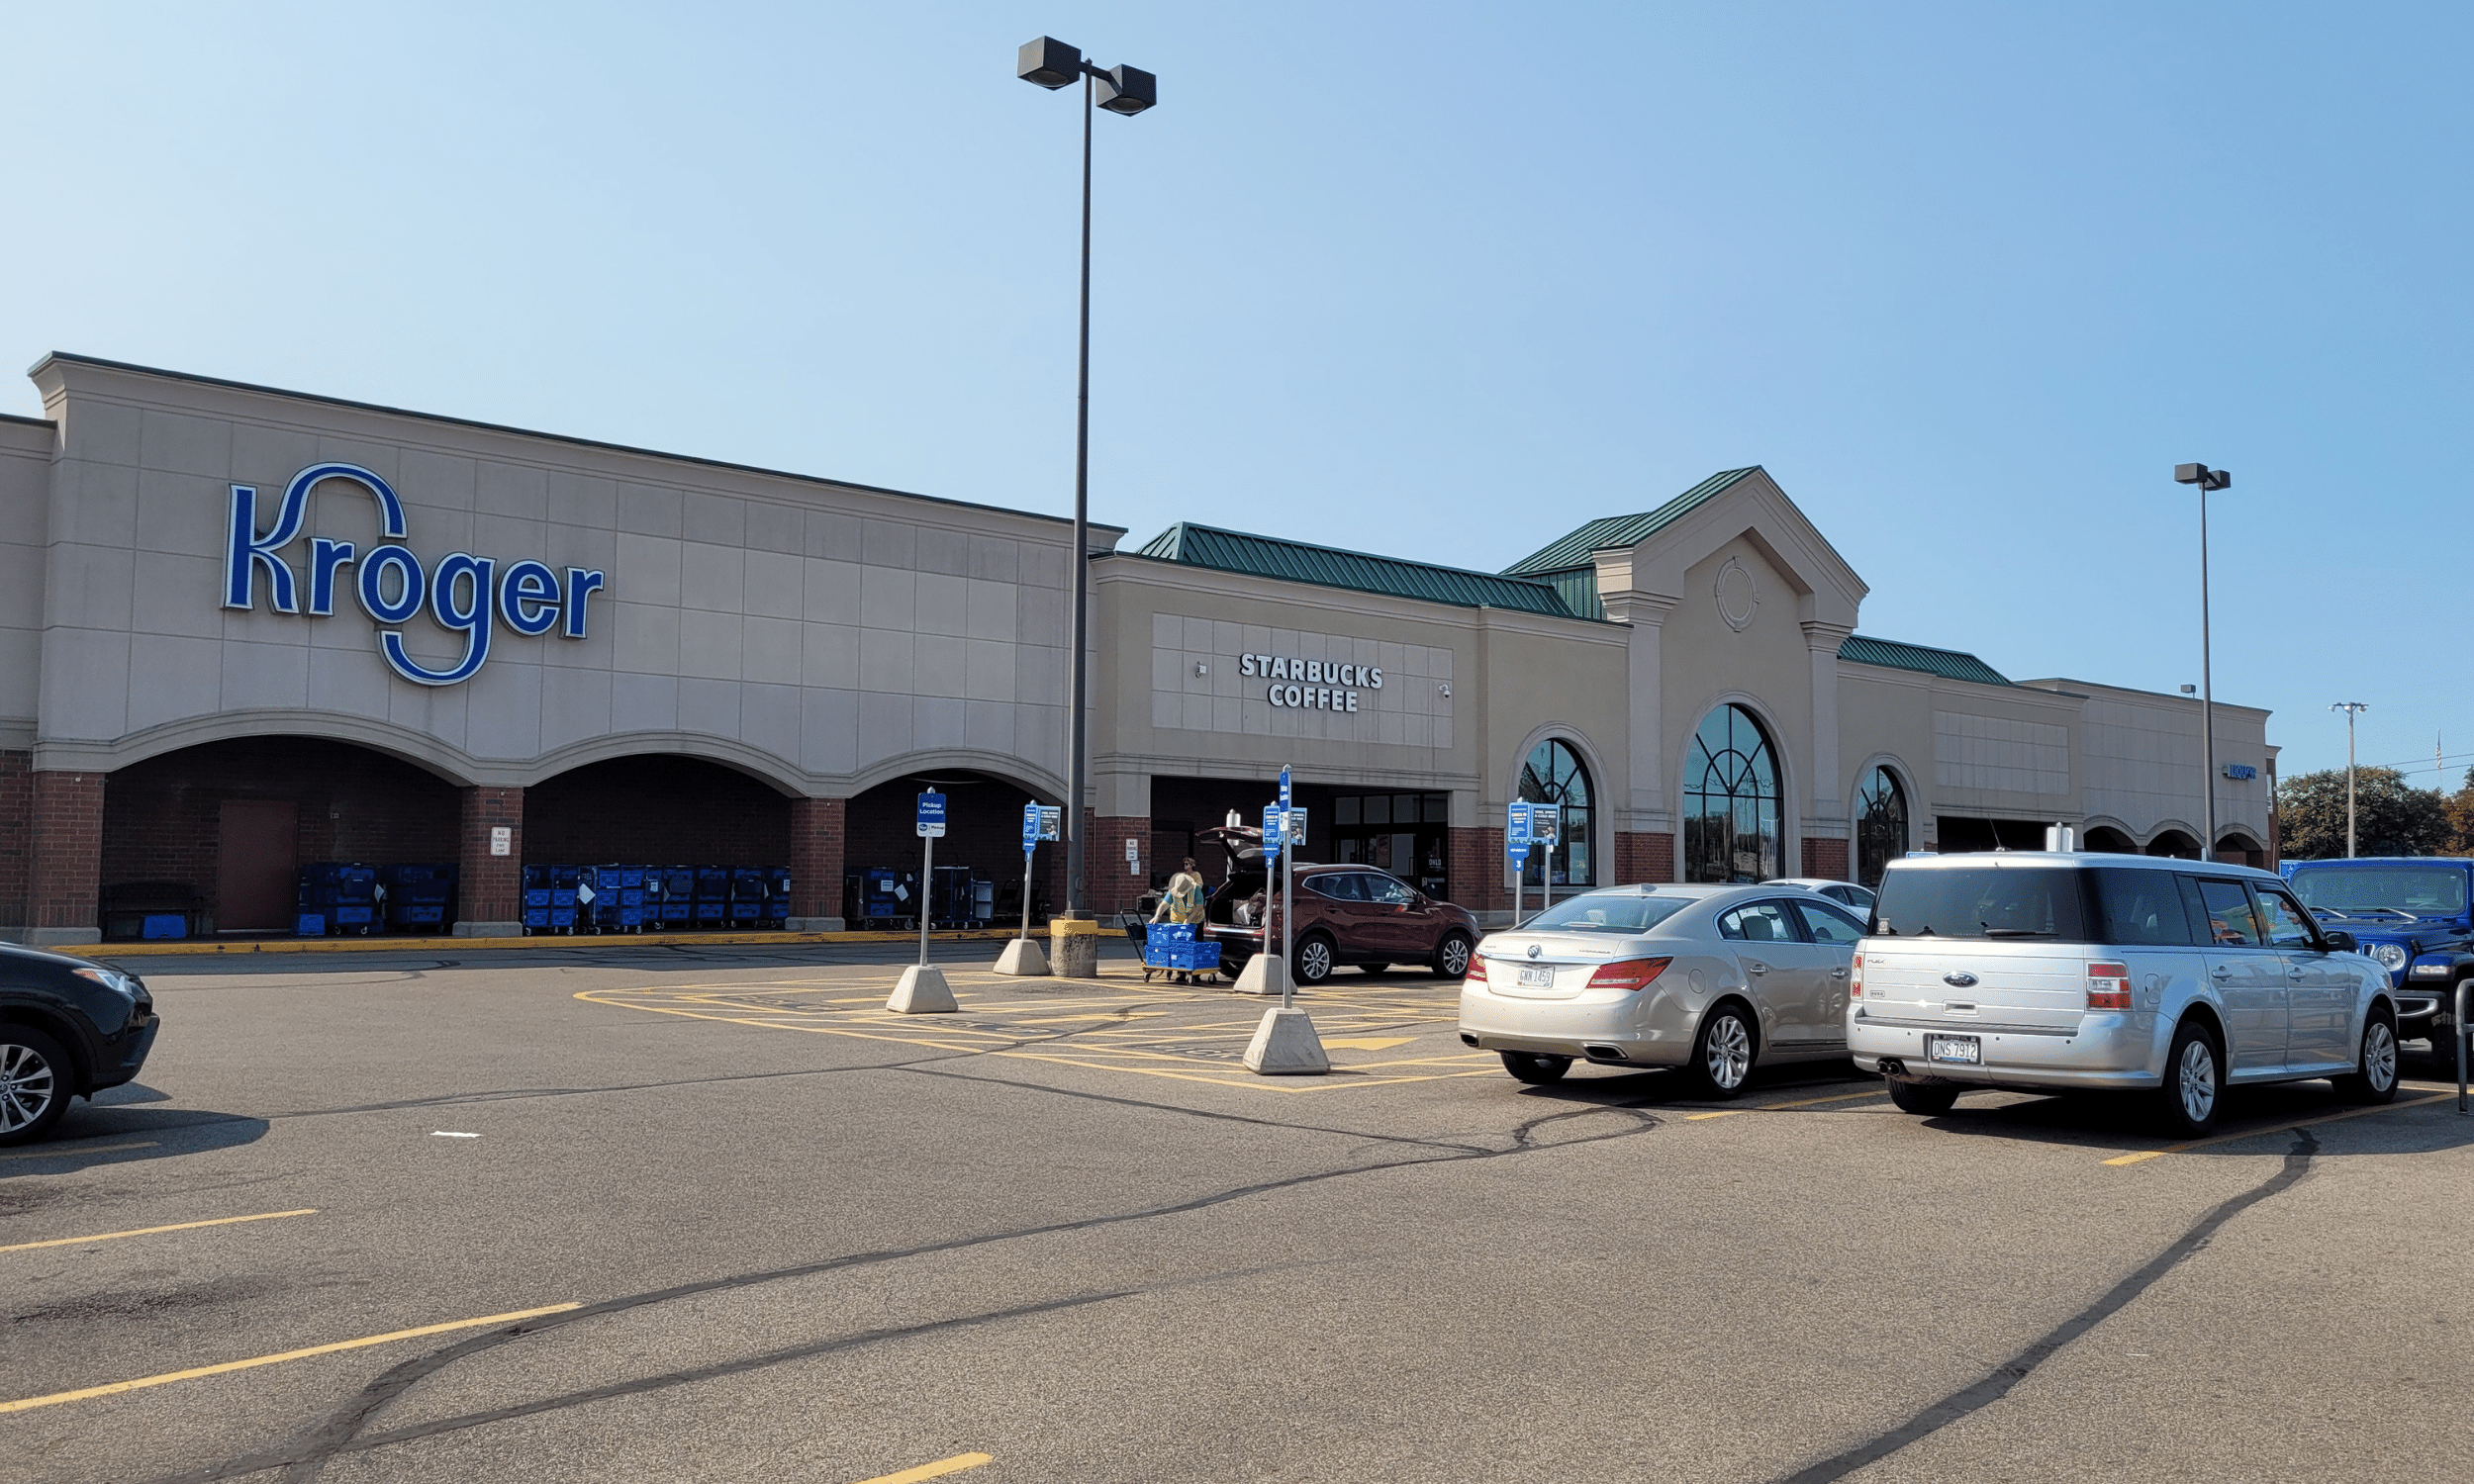 Wilmington Plaza in Wilmington, OH is anchored by a high-volume Kroger.